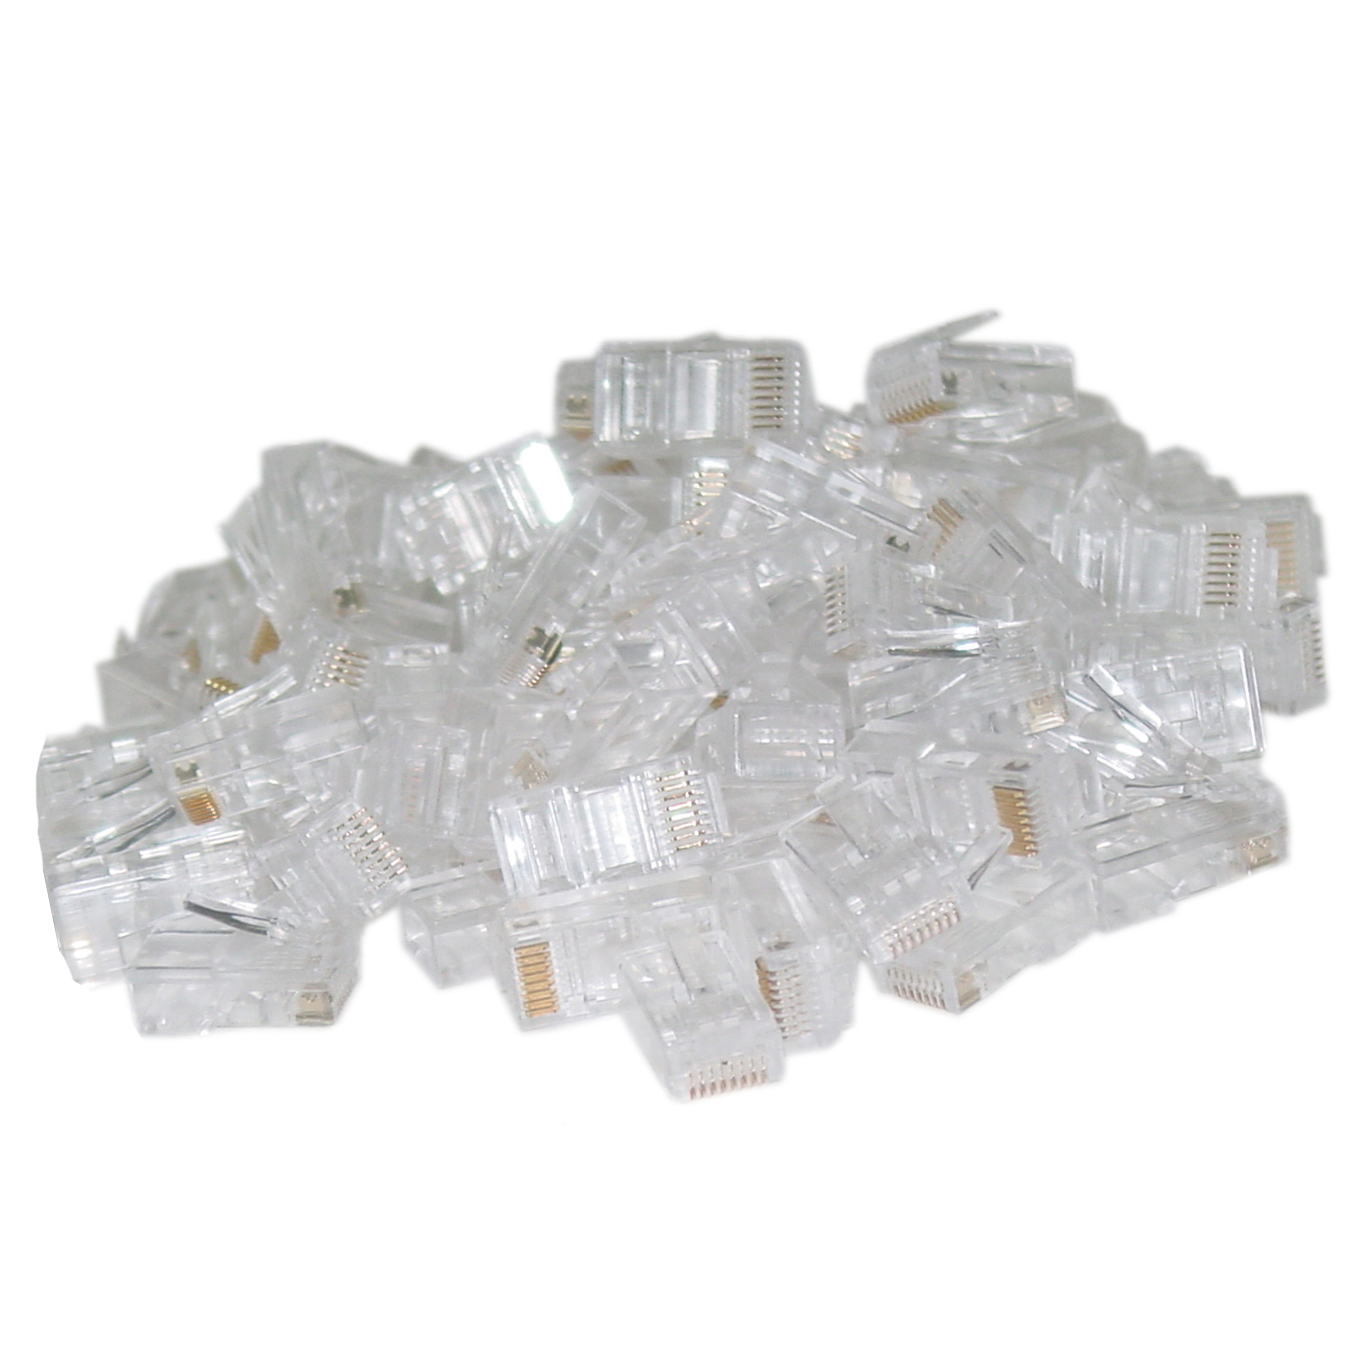 108702 - CAT6 RJ45 Crimp-On Connector Plugs for Stranded Cable - Bag of 50